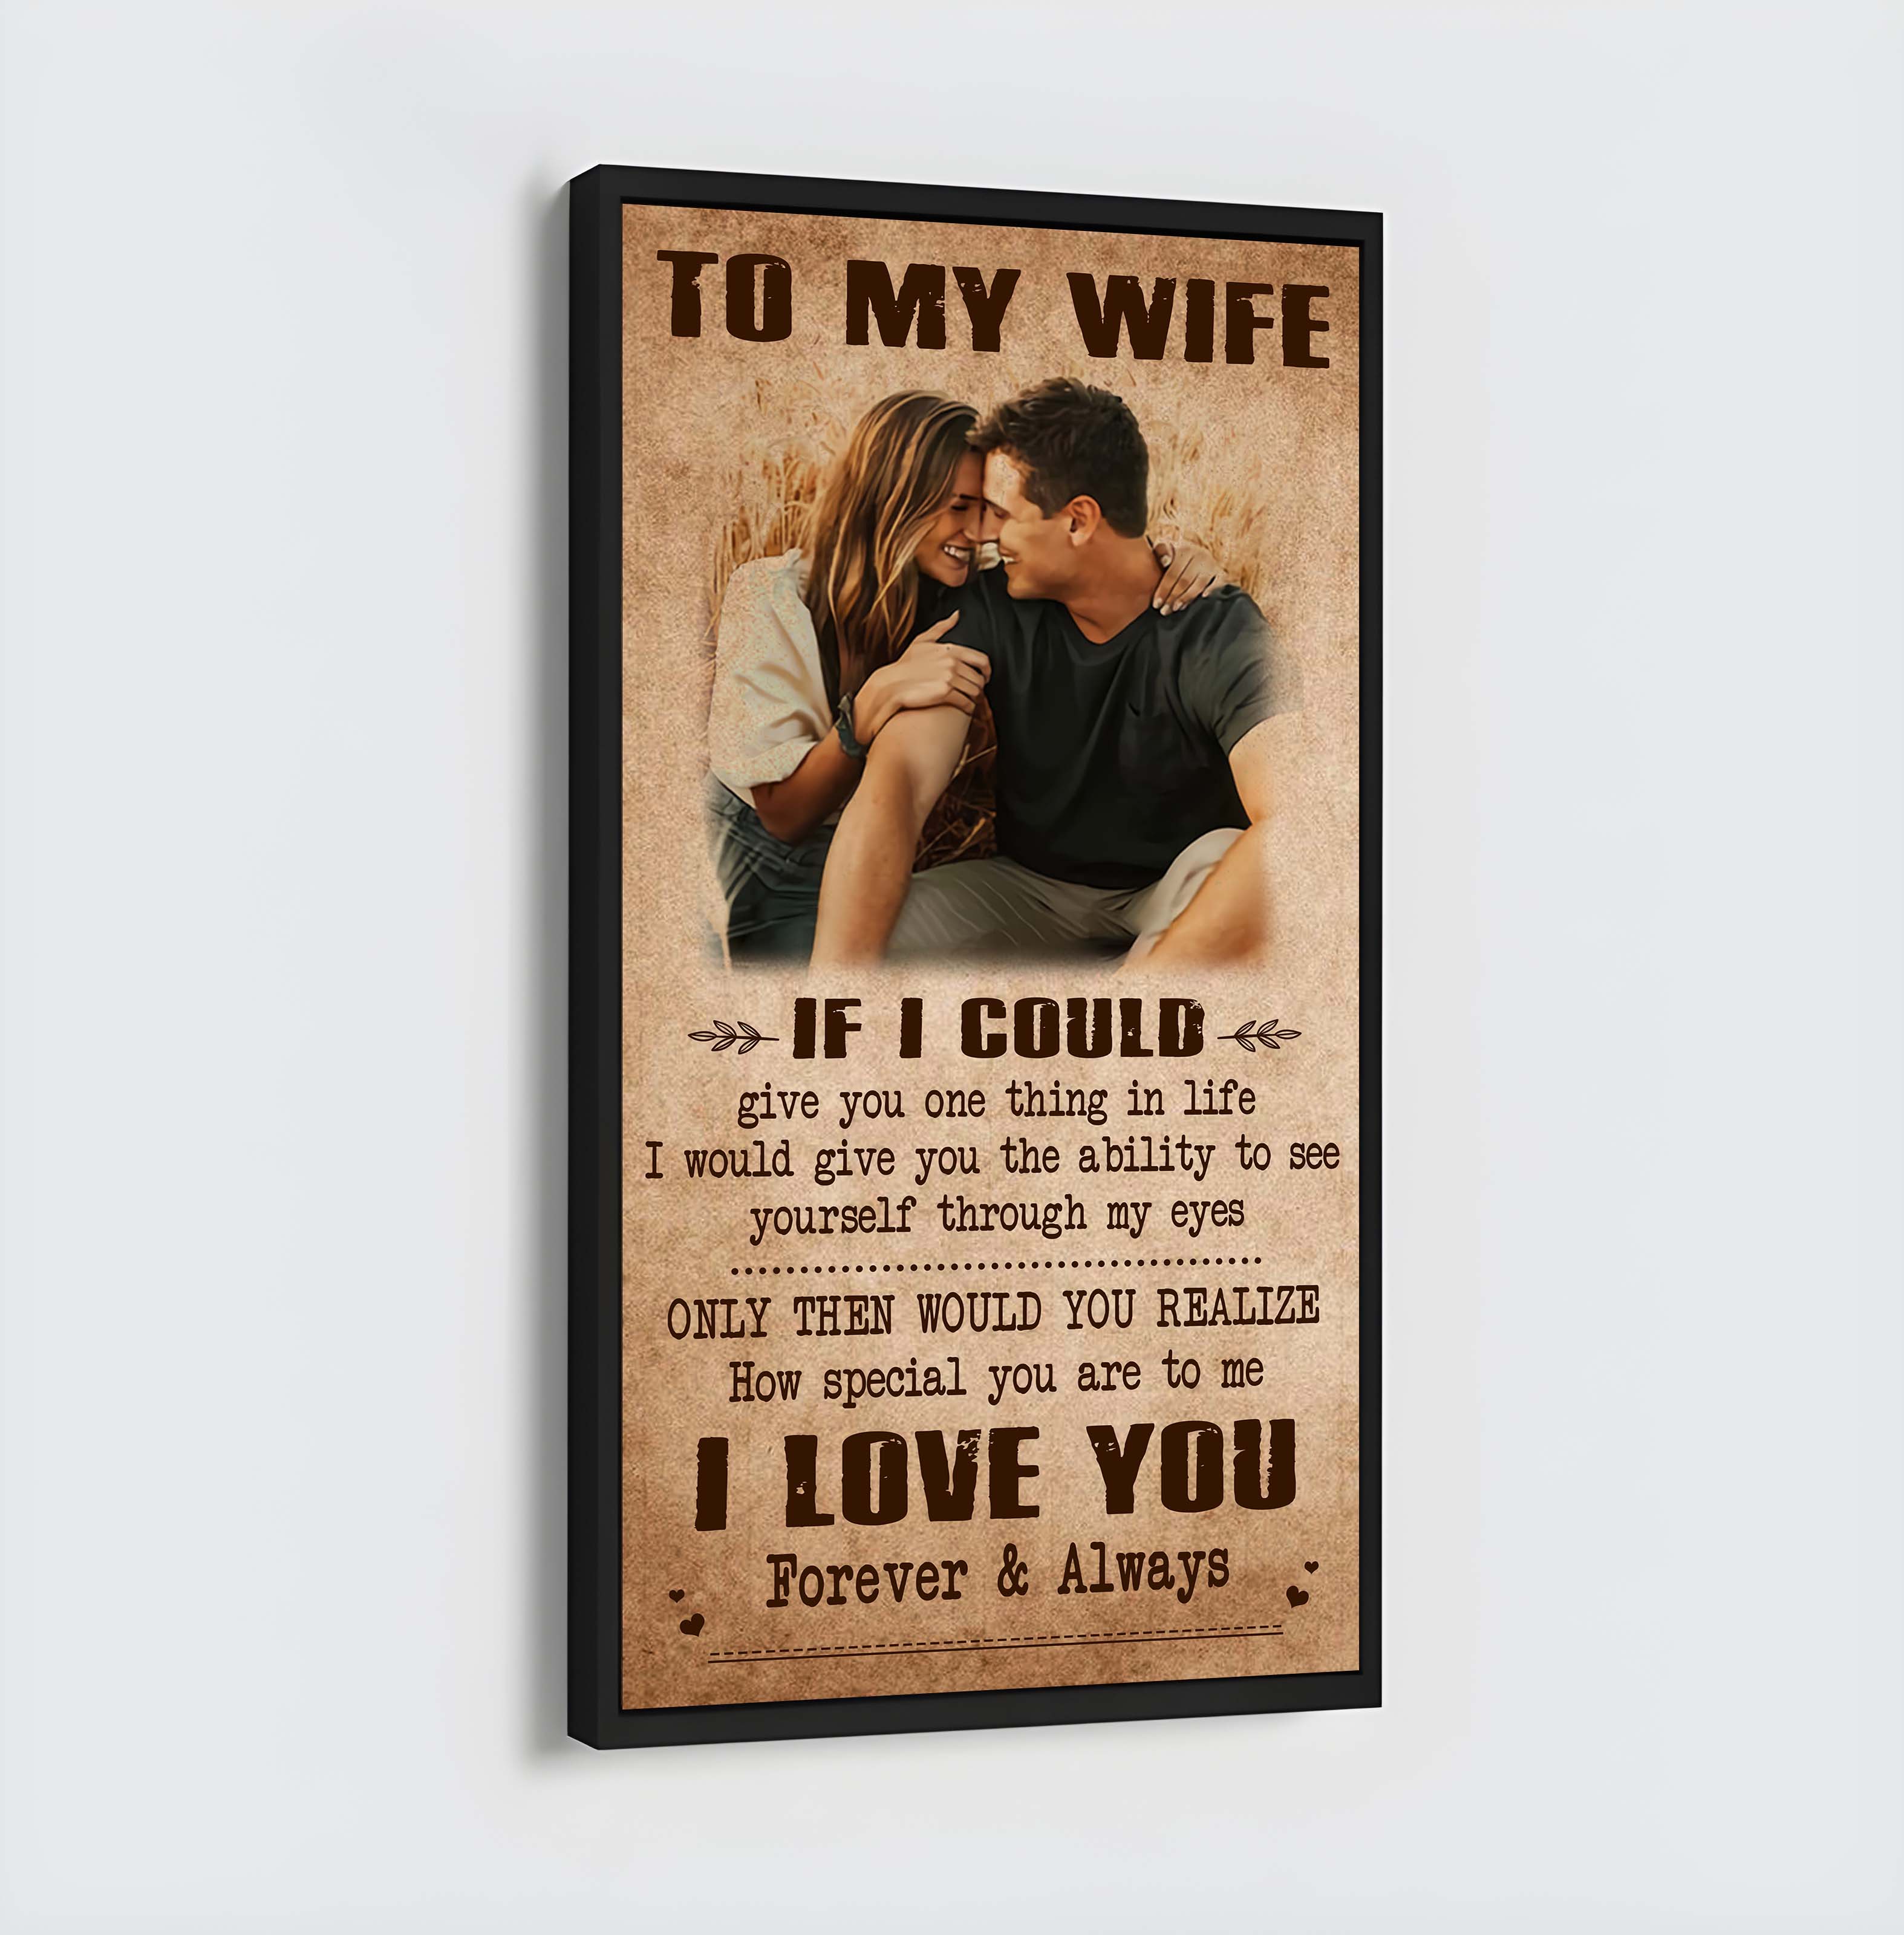 Valentine gifts-Custom image canvas-Husband to Wife- Marrying you was one of the best decision I ever made